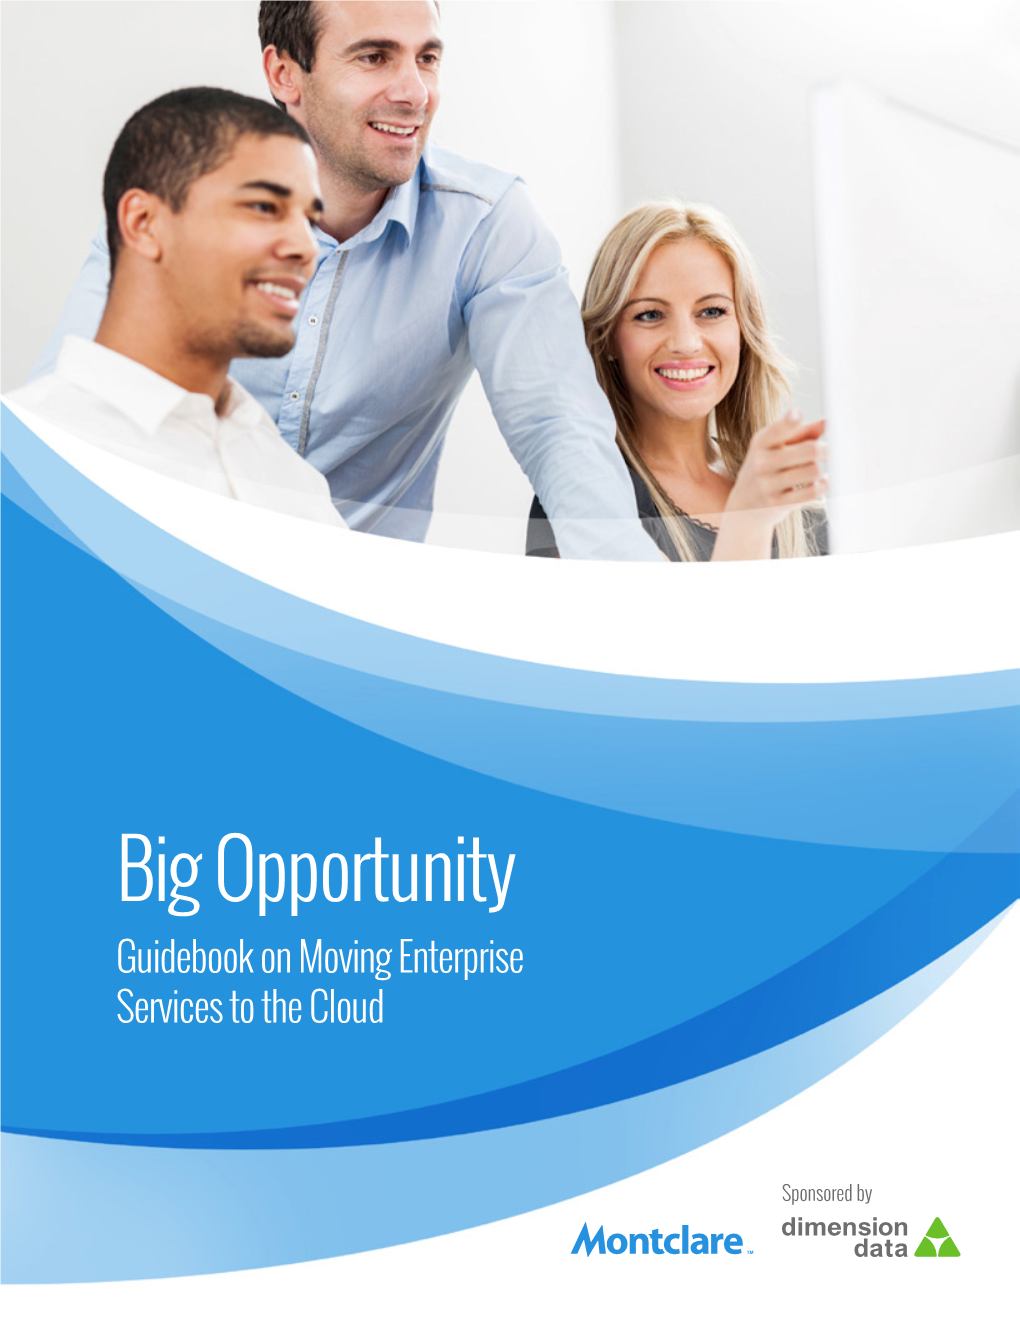 Big Opportunity Guidebook on Moving Enterprise Services to the Cloud